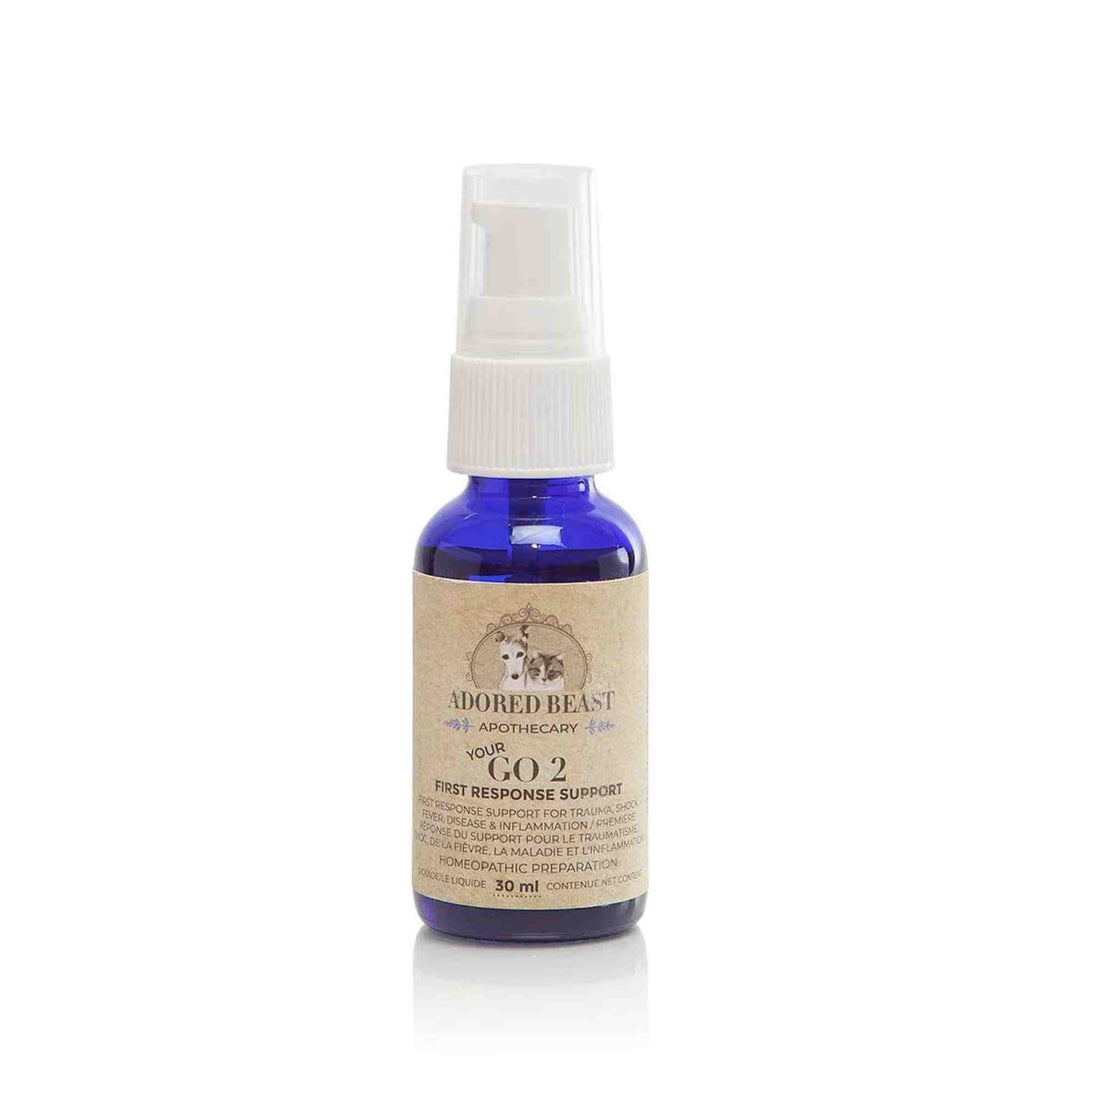 Your Go 2 - 30ml bottle by Adored Beast Homeopathic Preparation